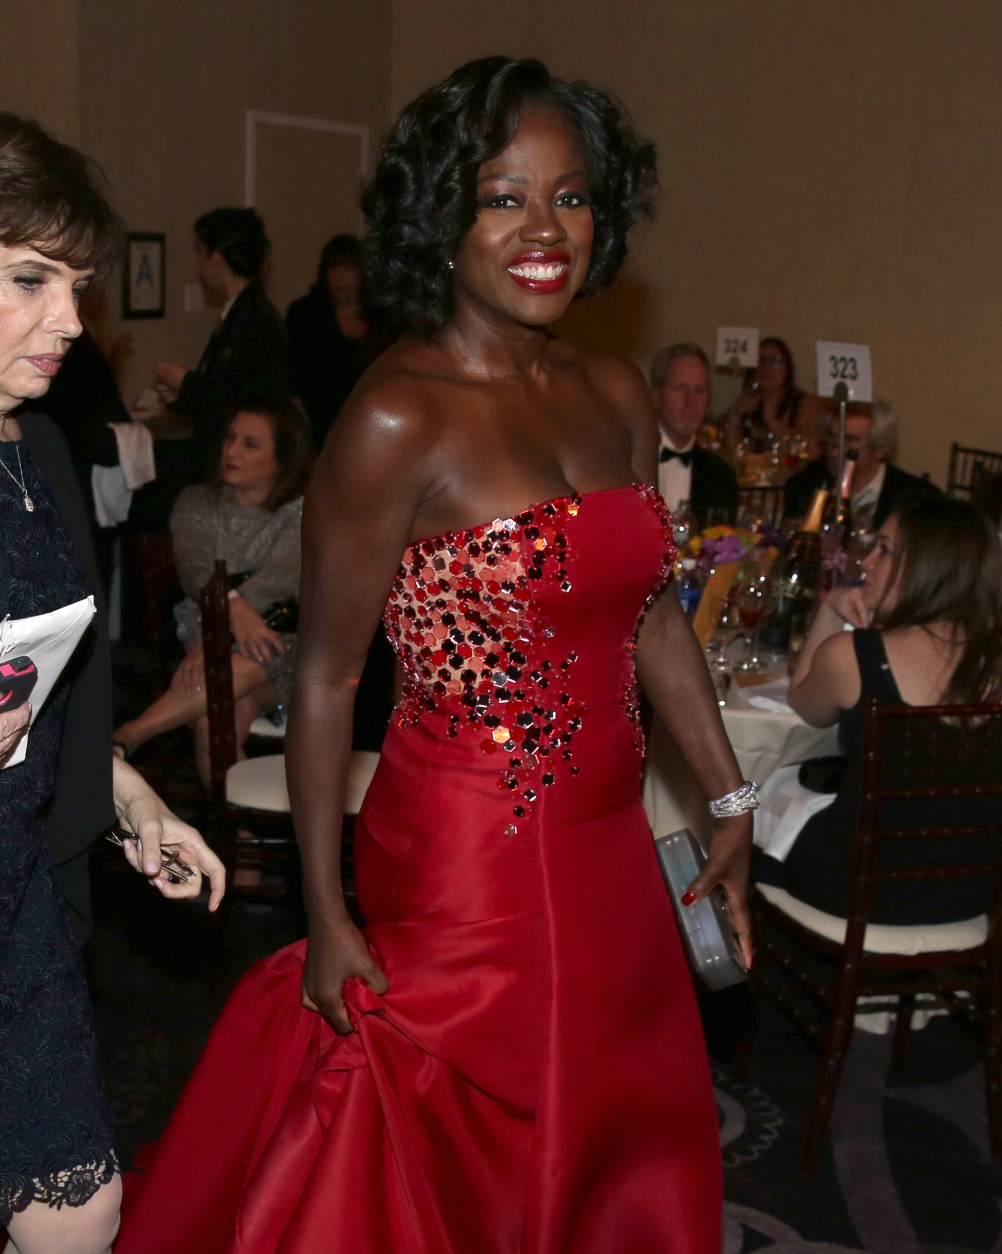 Viola Davis poses in the audience at the 72nd annual Golden Globe Awards at the Beverly Hilton Hotel on Sunday, Jan. 11, 2015, in Beverly Hills, Calif. (Photo by Matt Sayles/Invision/AP)